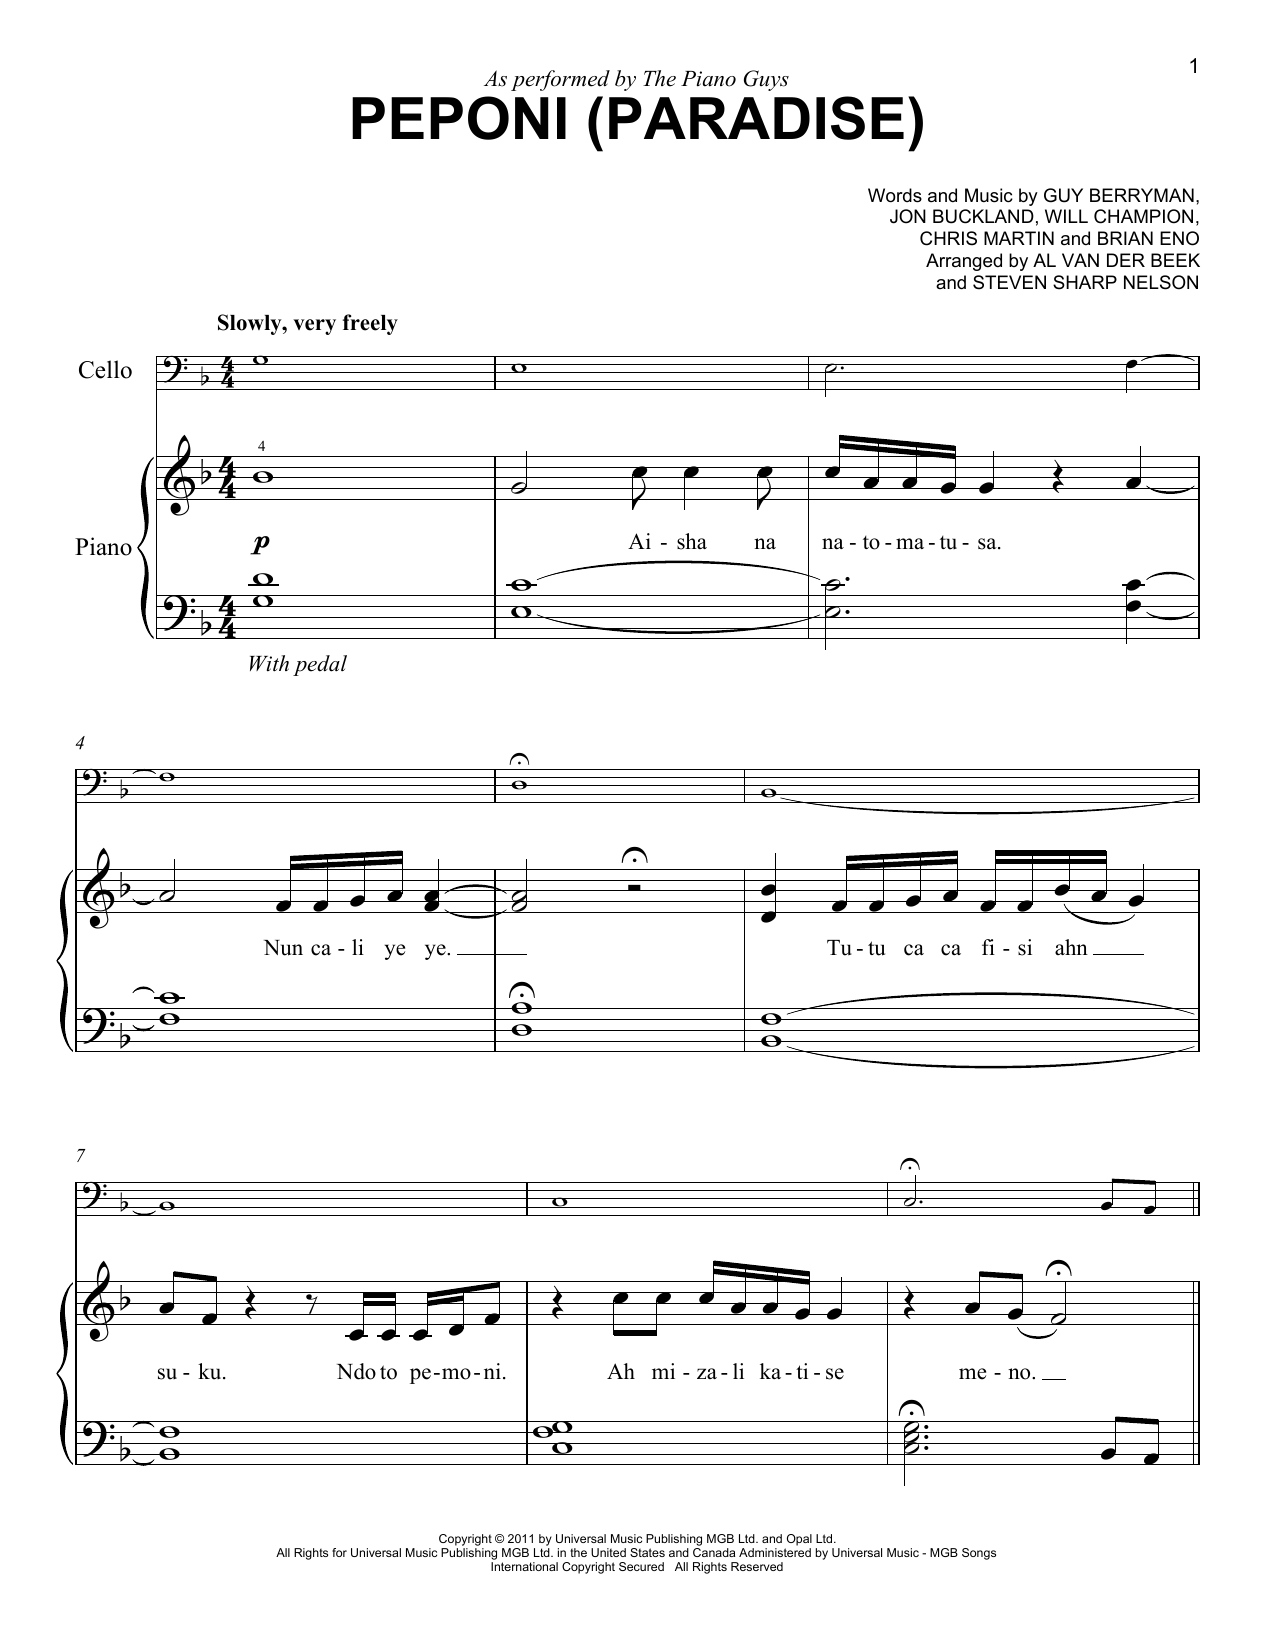 Download The Piano Guys Peponi (Paradise) Sheet Music